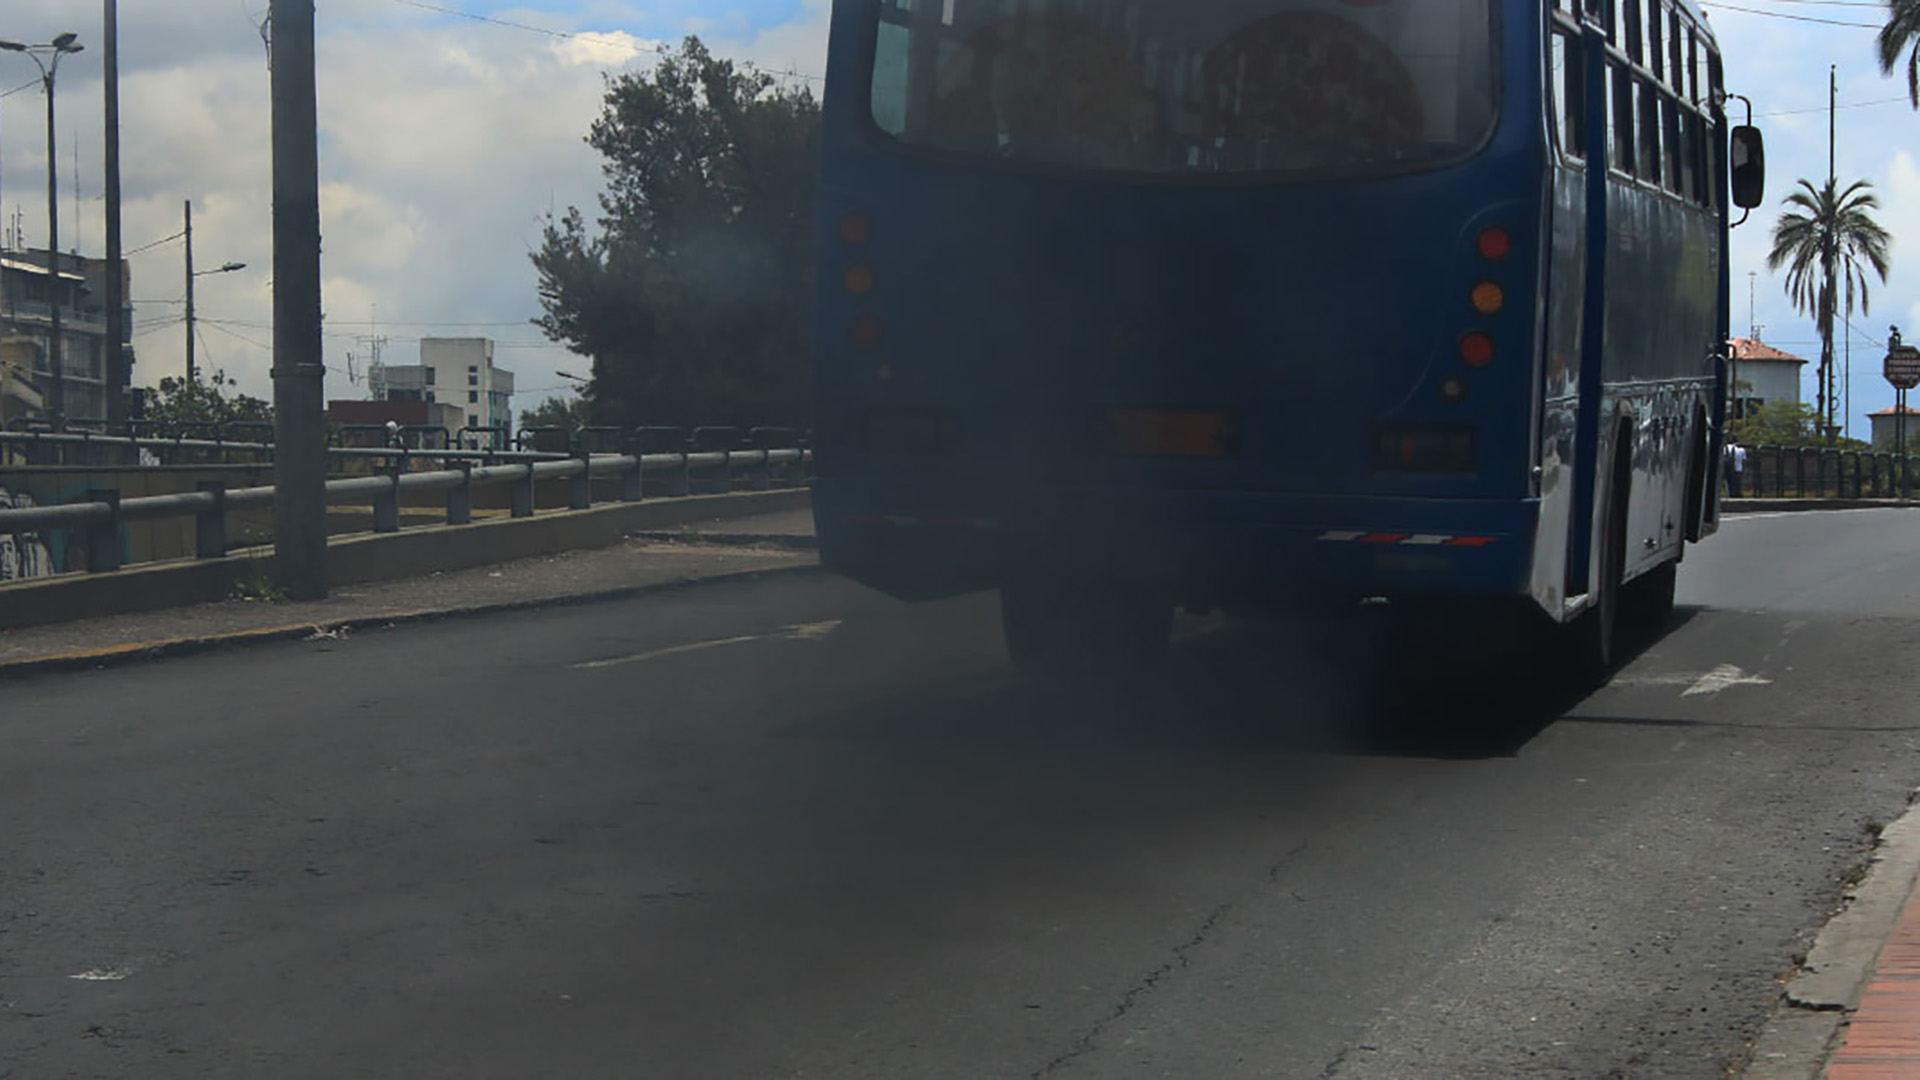 A bus emitting black carbon in the form of smog and exhaust